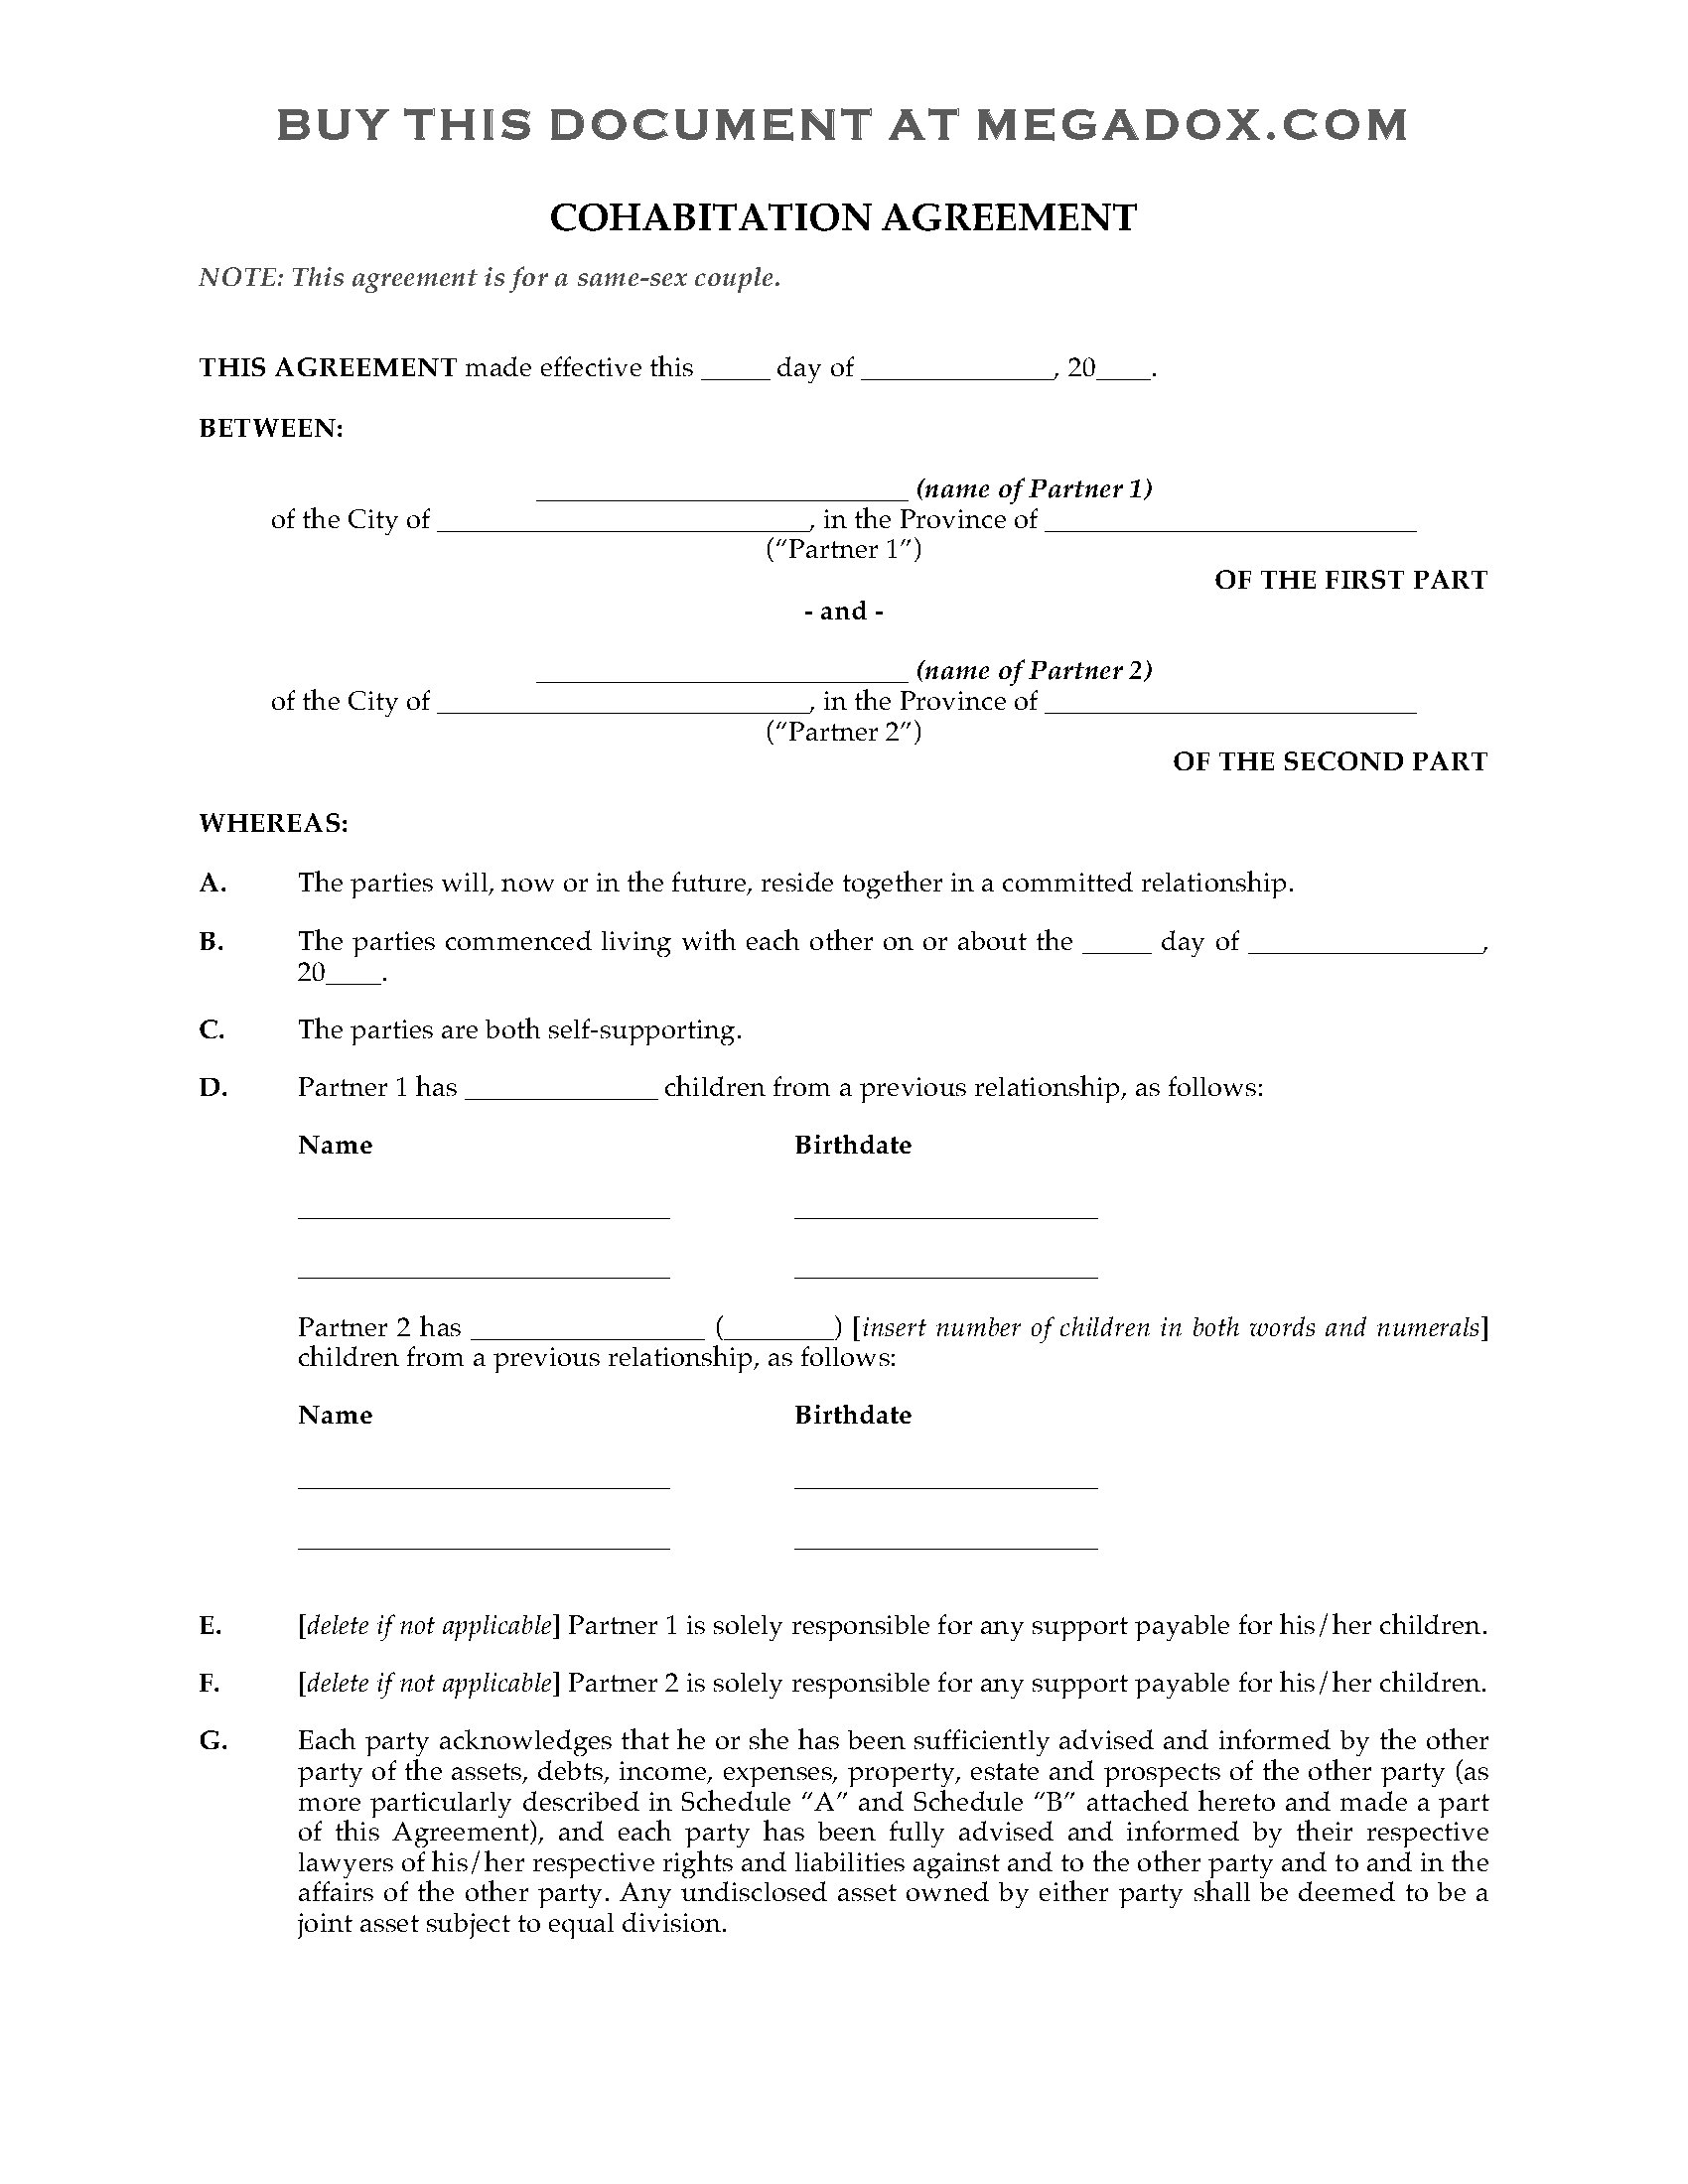 Canada Cohabitation Agreement For Same Sex Couple Legal Forms